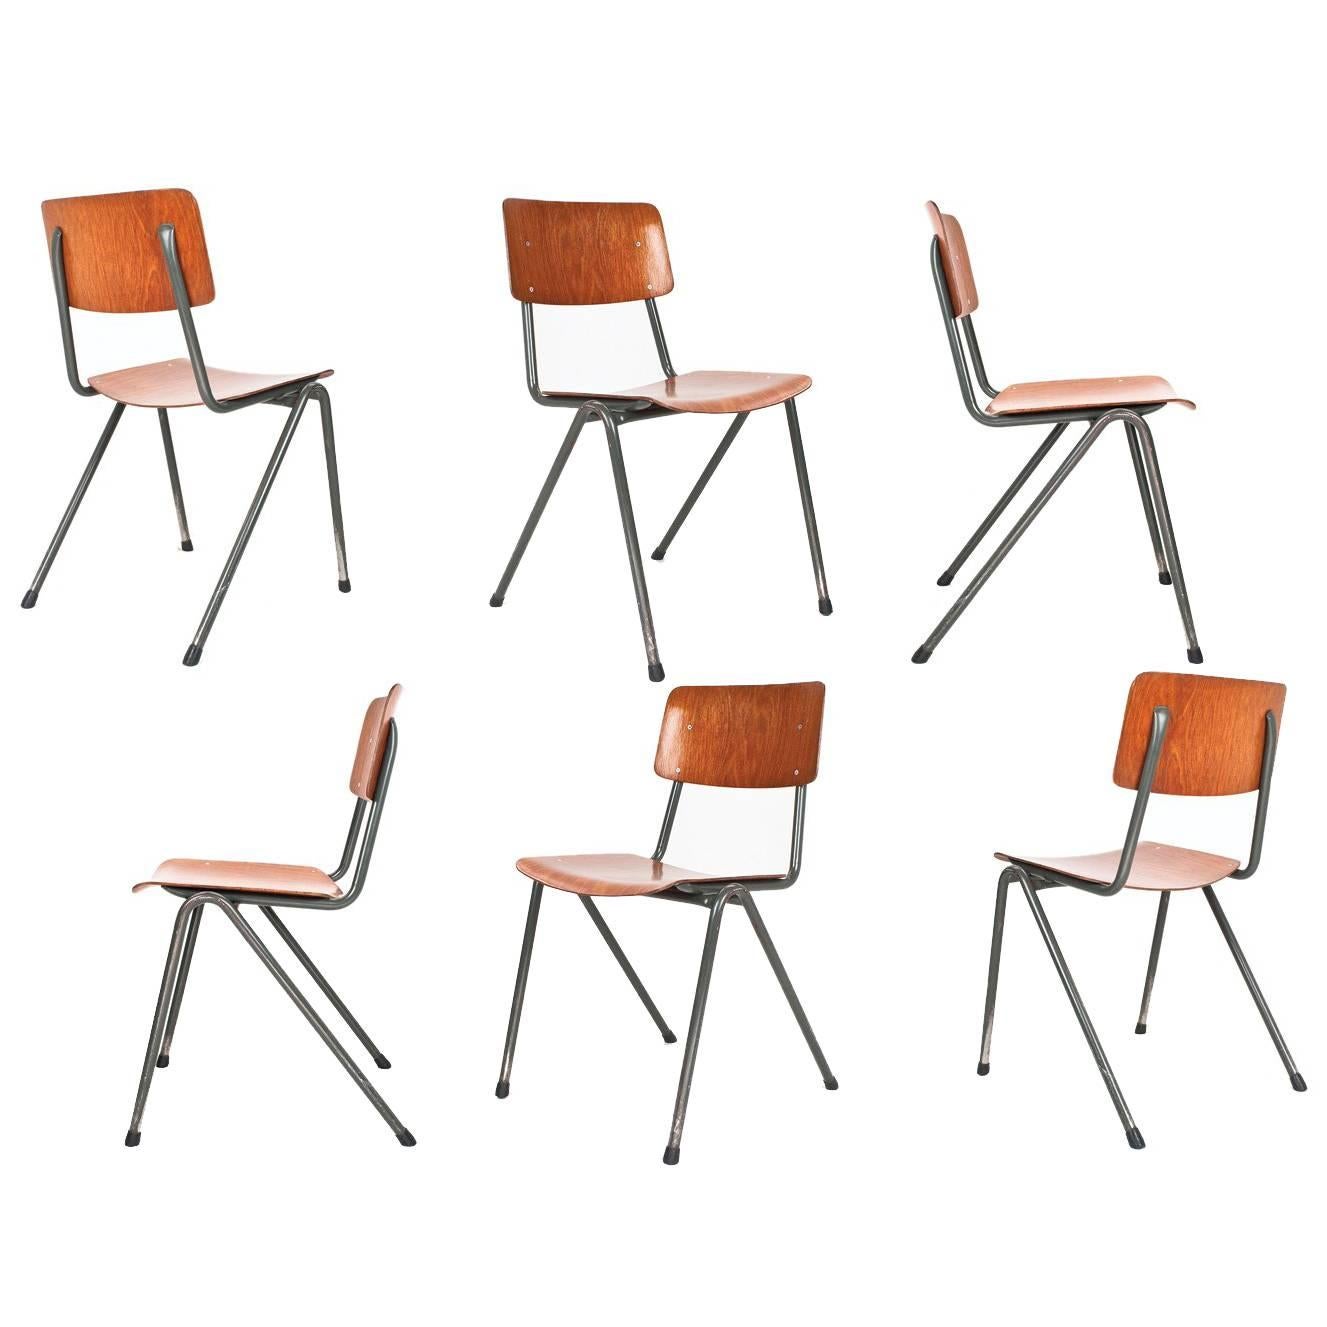 Dutch Industrial School Chairs 1970, Laminated Wood and Grey Metal Frame